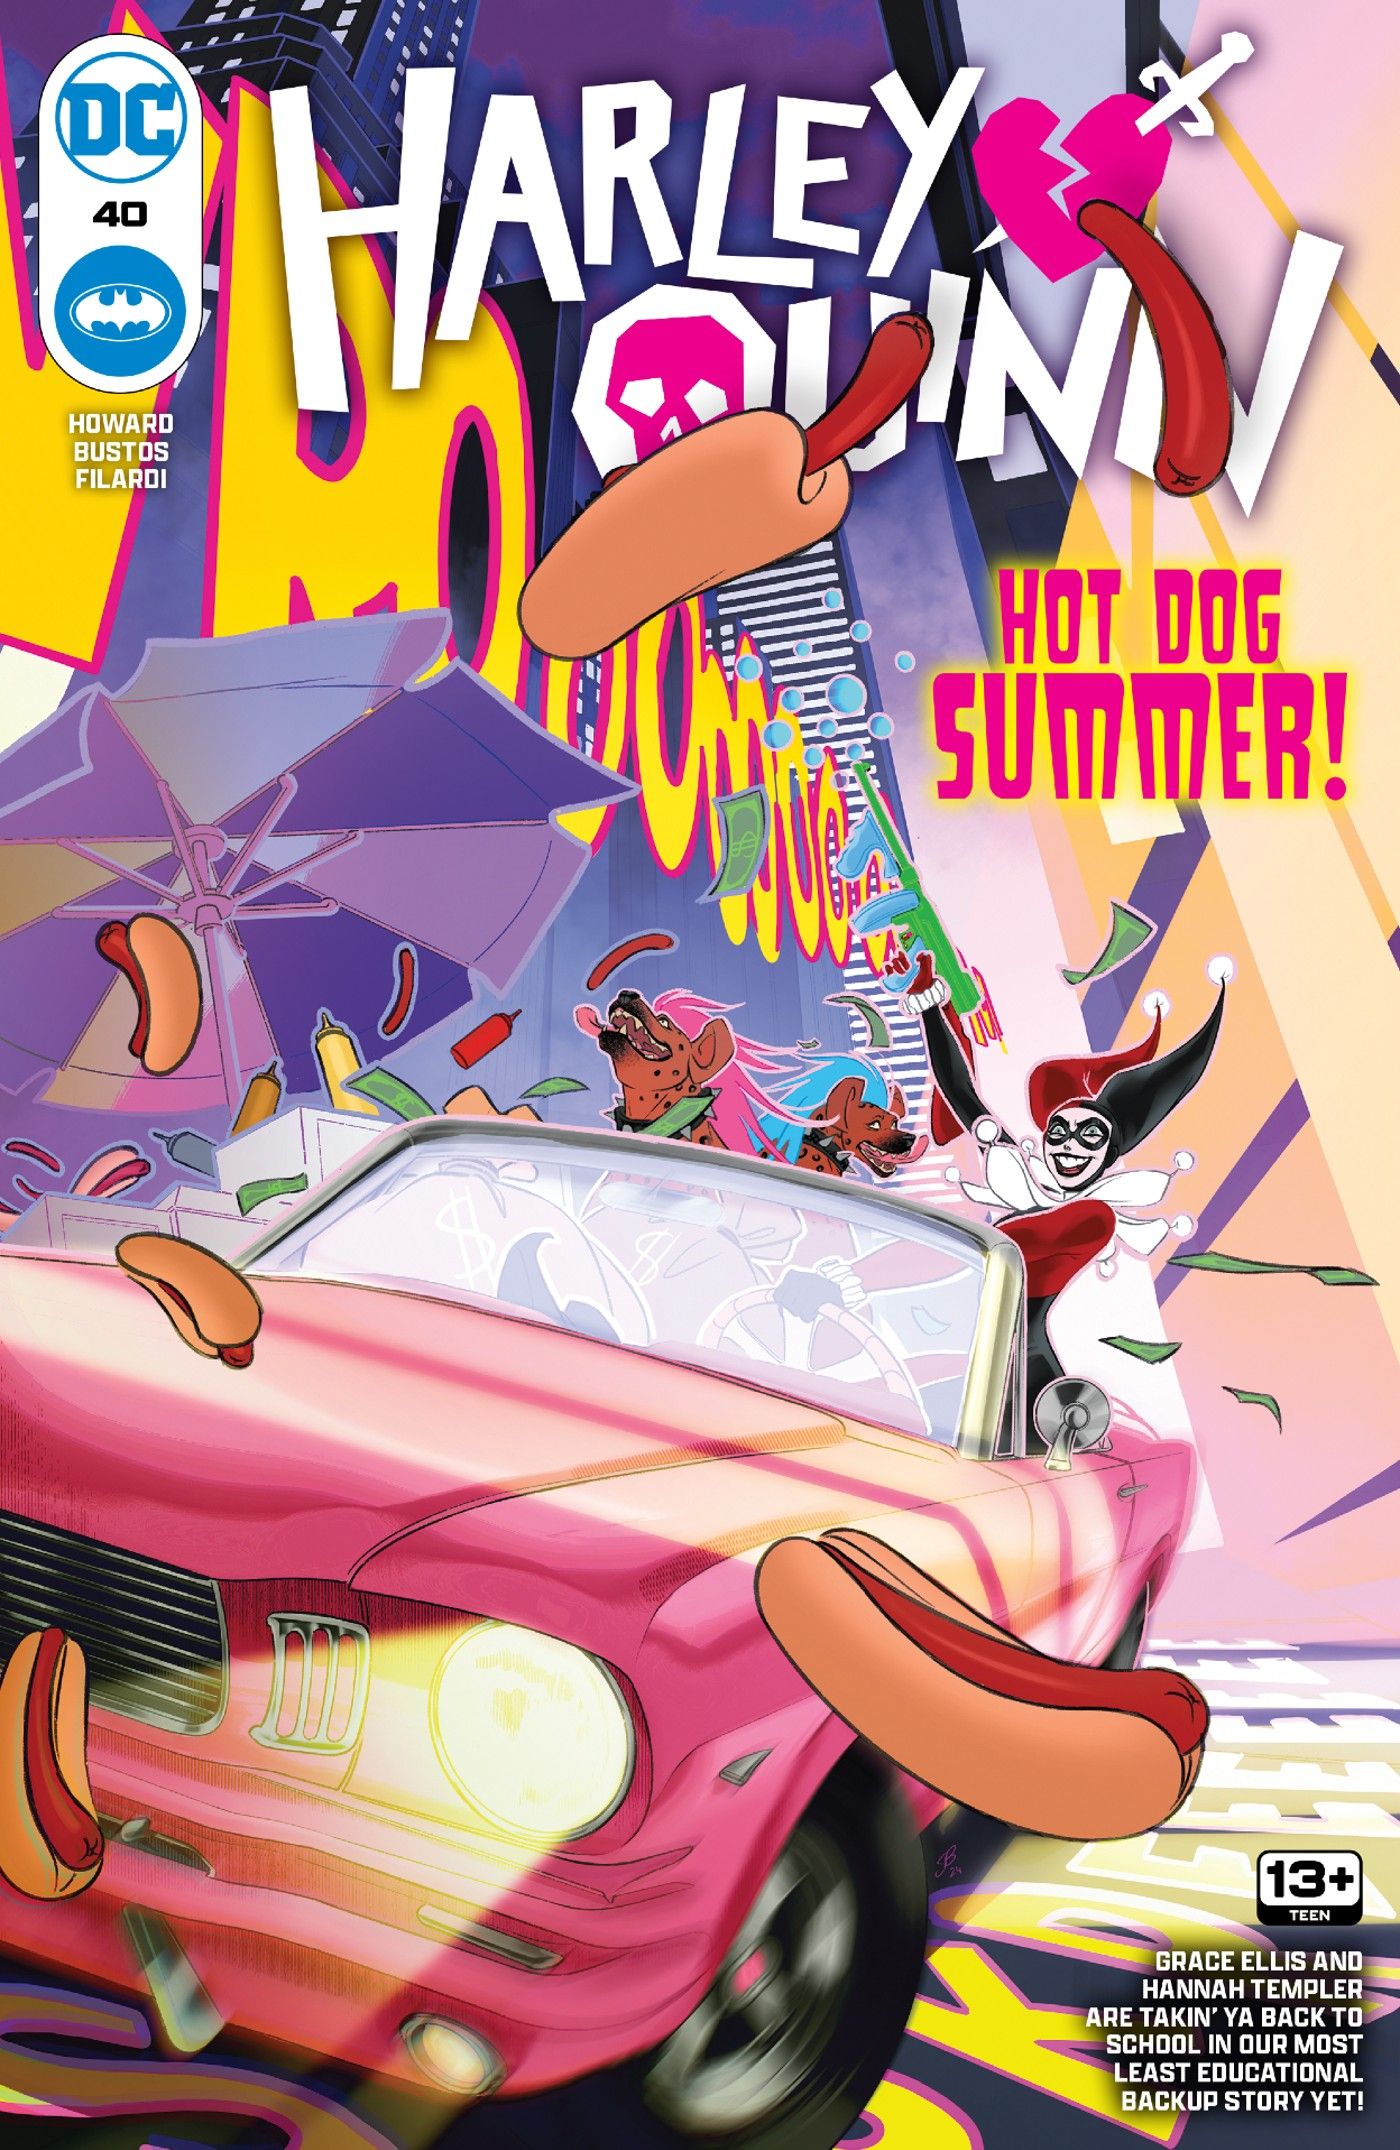 Harley Quinn 40 features Harley Quinn driving a car chaotically with her pet hyenas as hot dogs fly everywhere